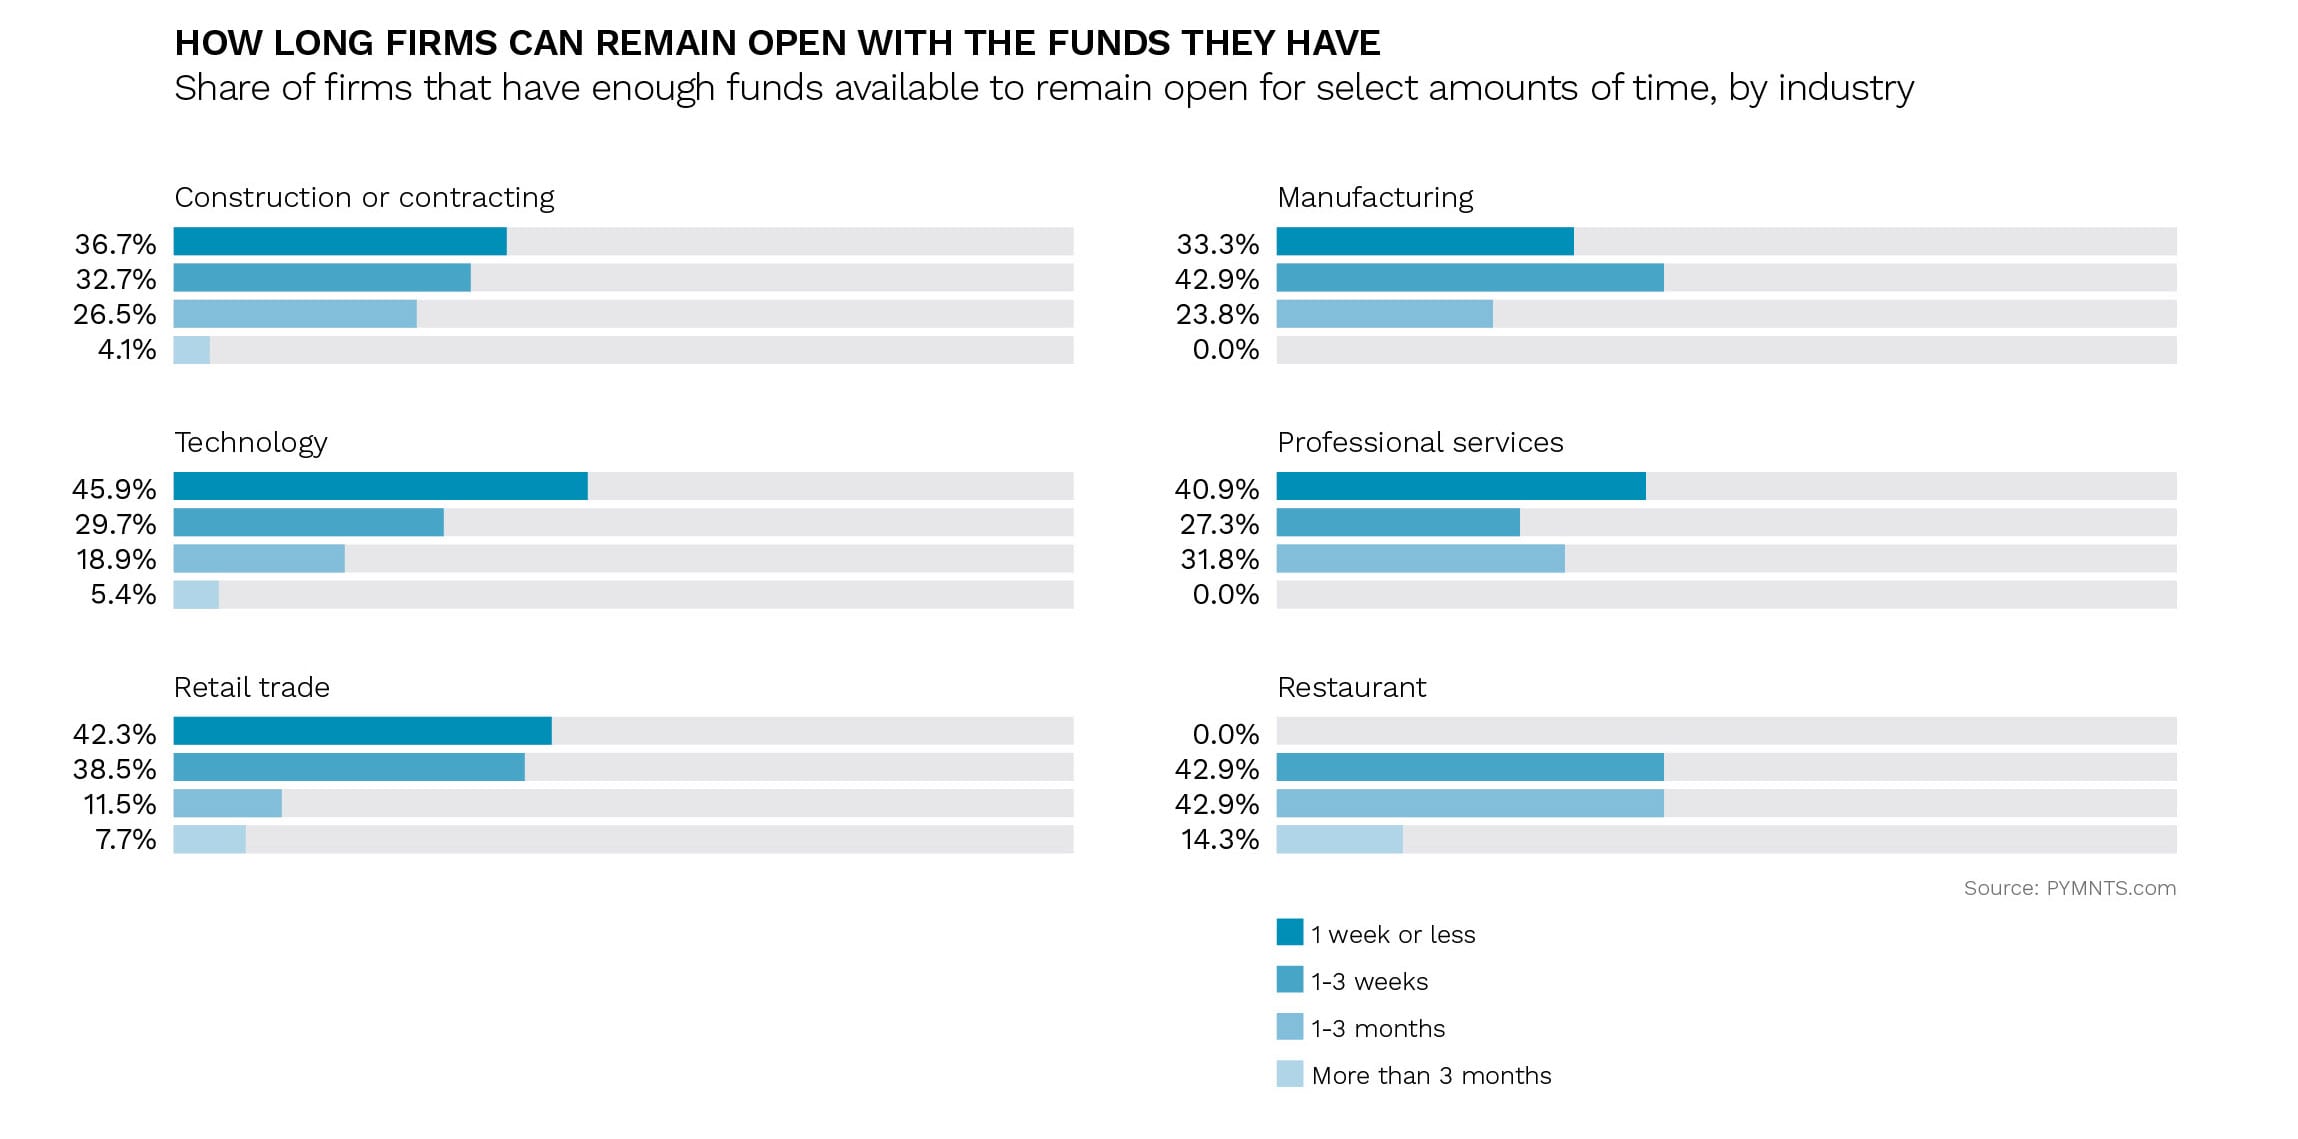 Table: How Long Firms Can Remain Open